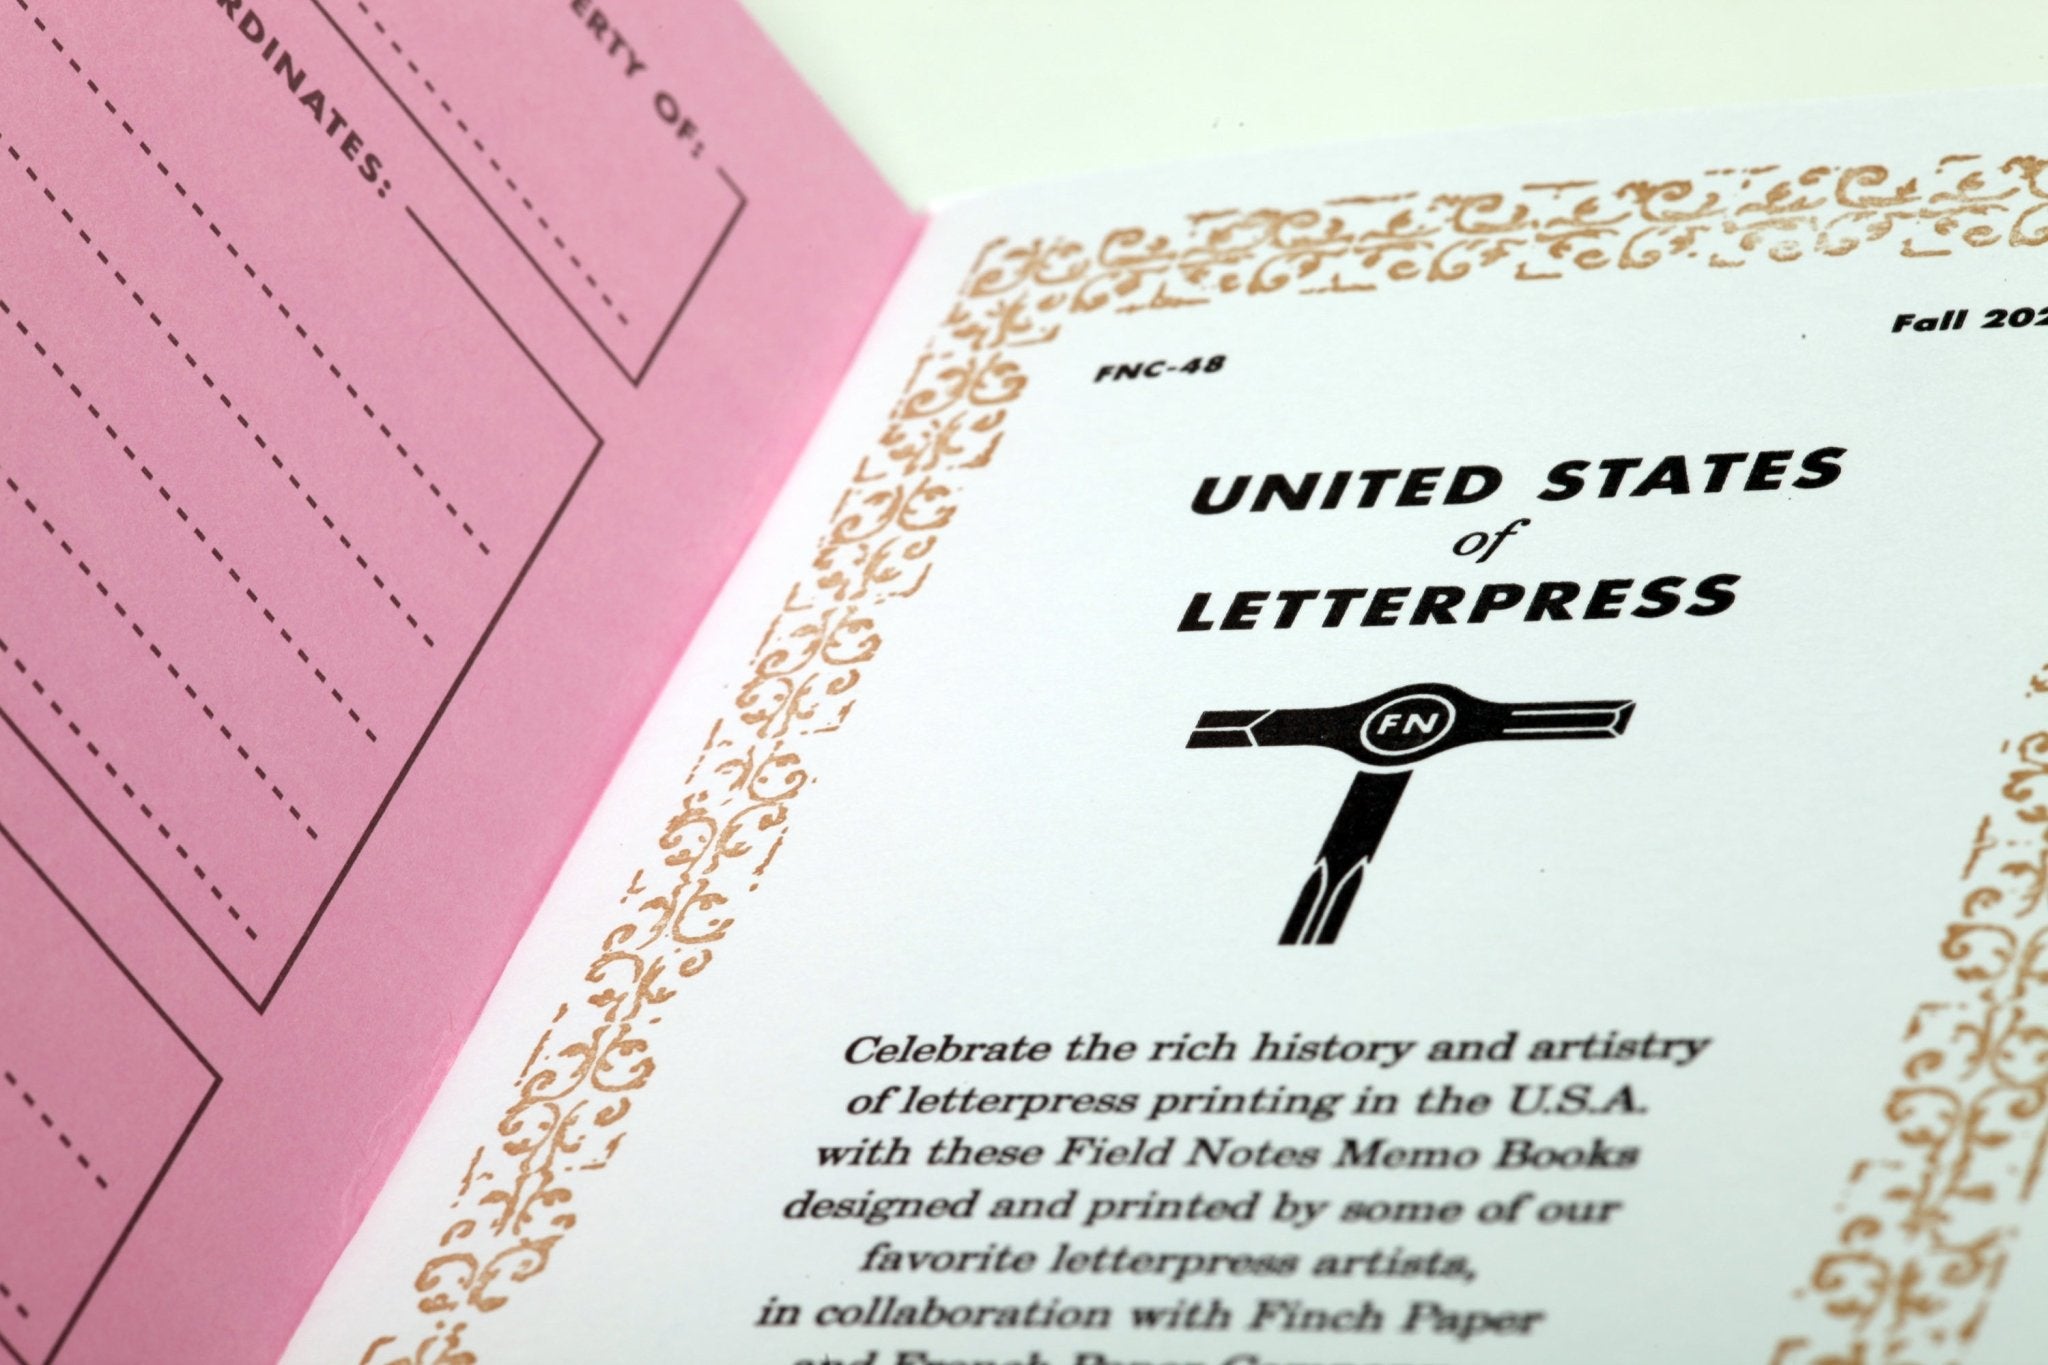 Field Notes: United States of Letterpress